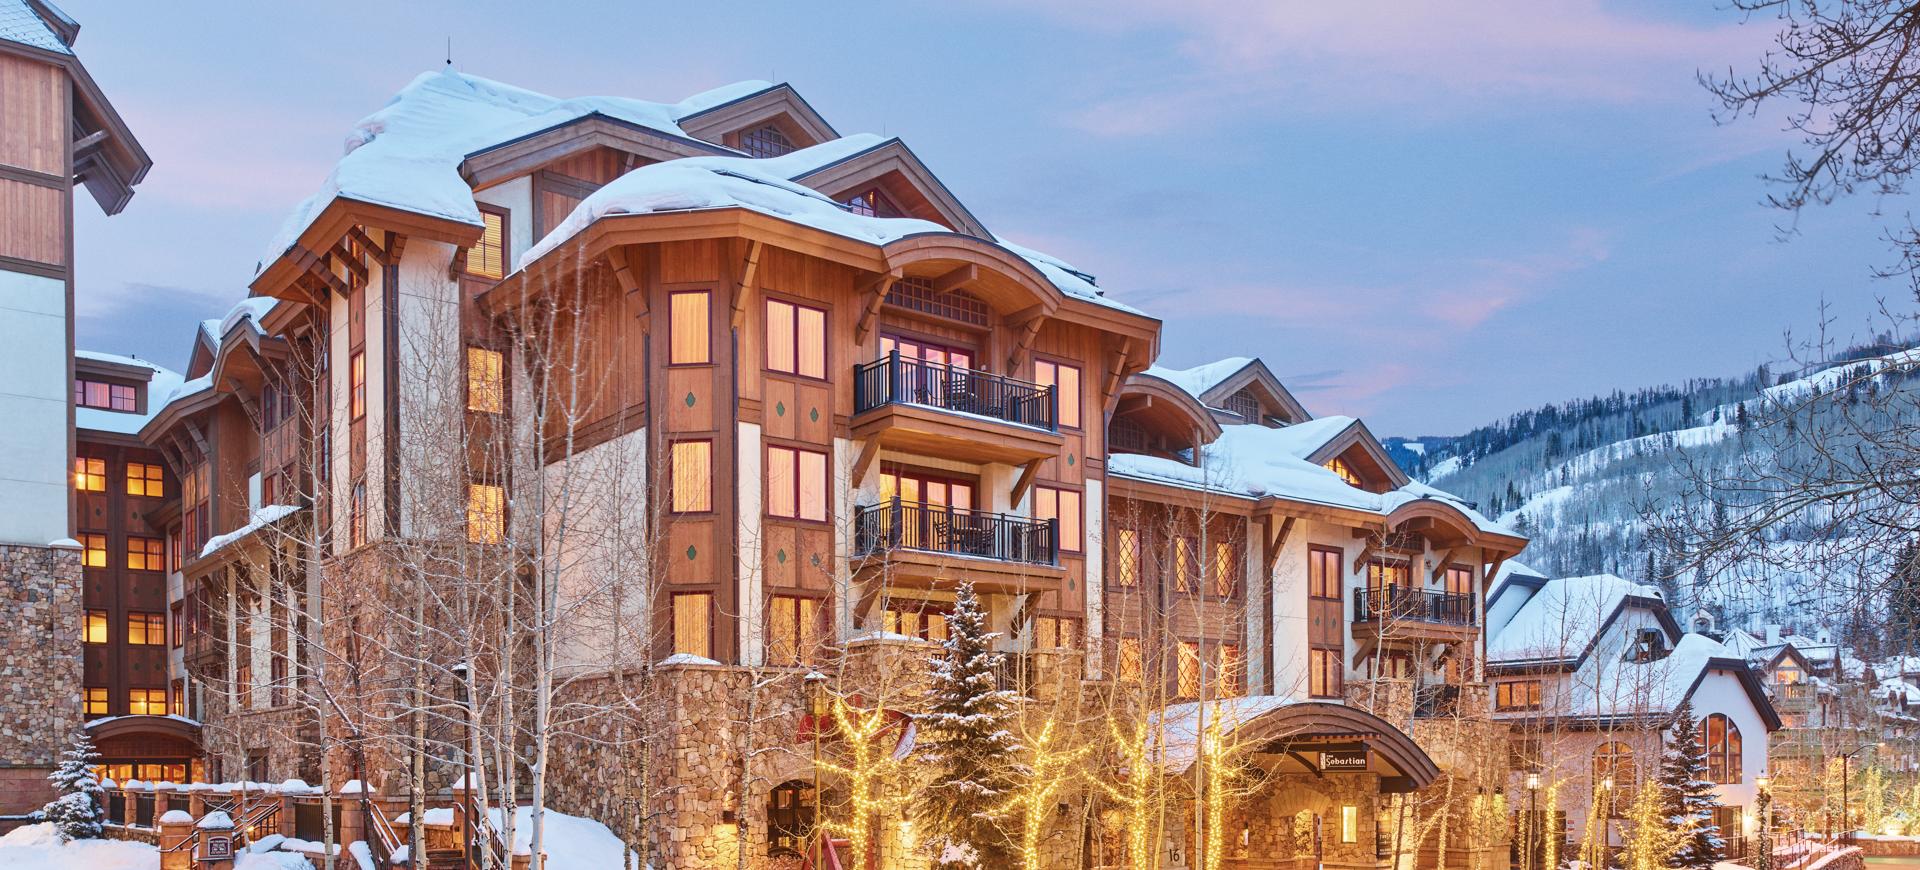 exterior shot of The Sebastian - Vail hotel portico in winter